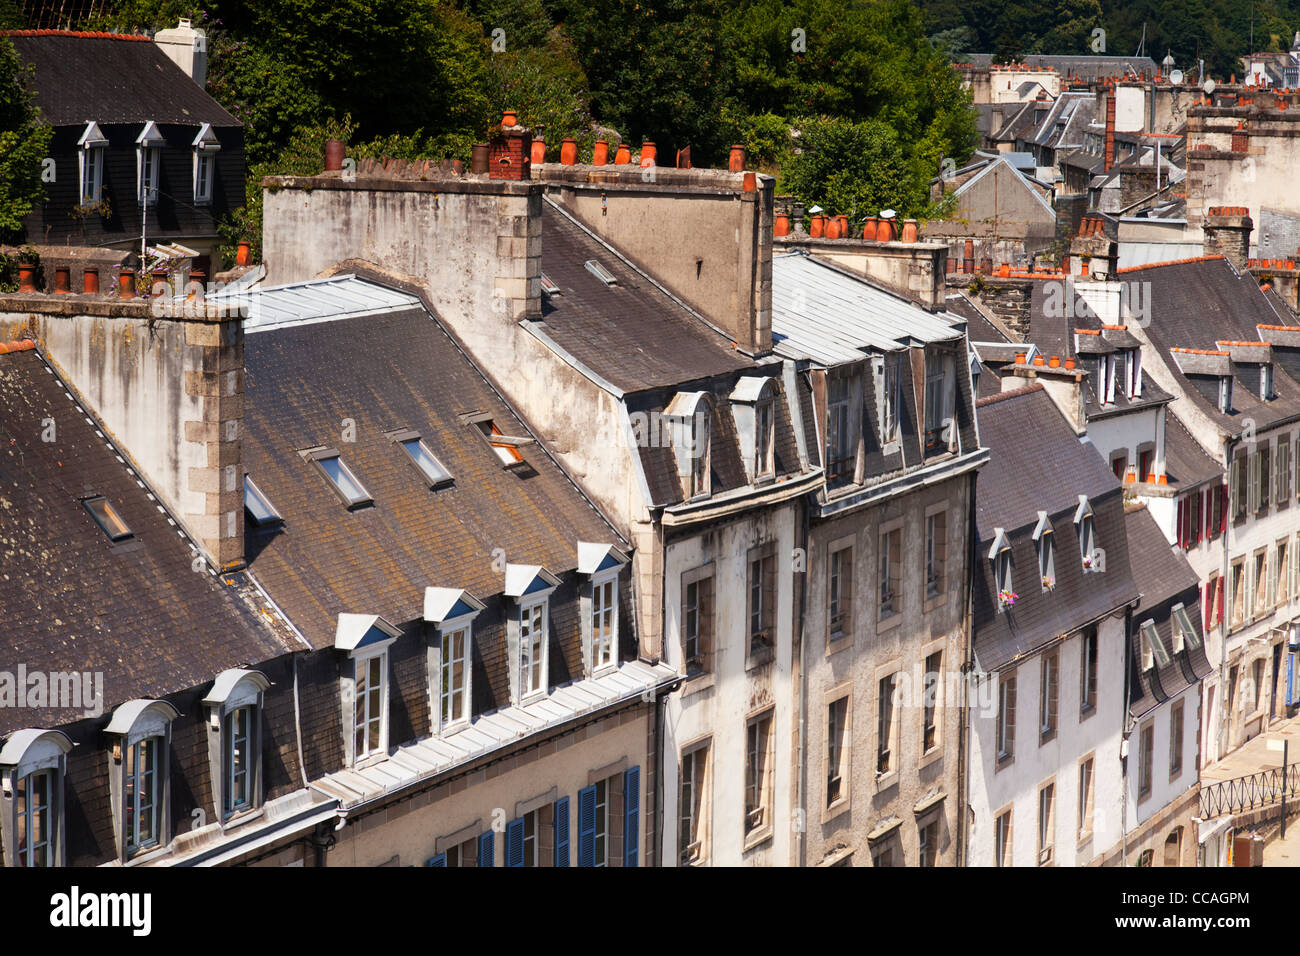 A view over the roof tops of old Morlaix, Finistere, Brittany, France, from the viaduct. Stock Photo